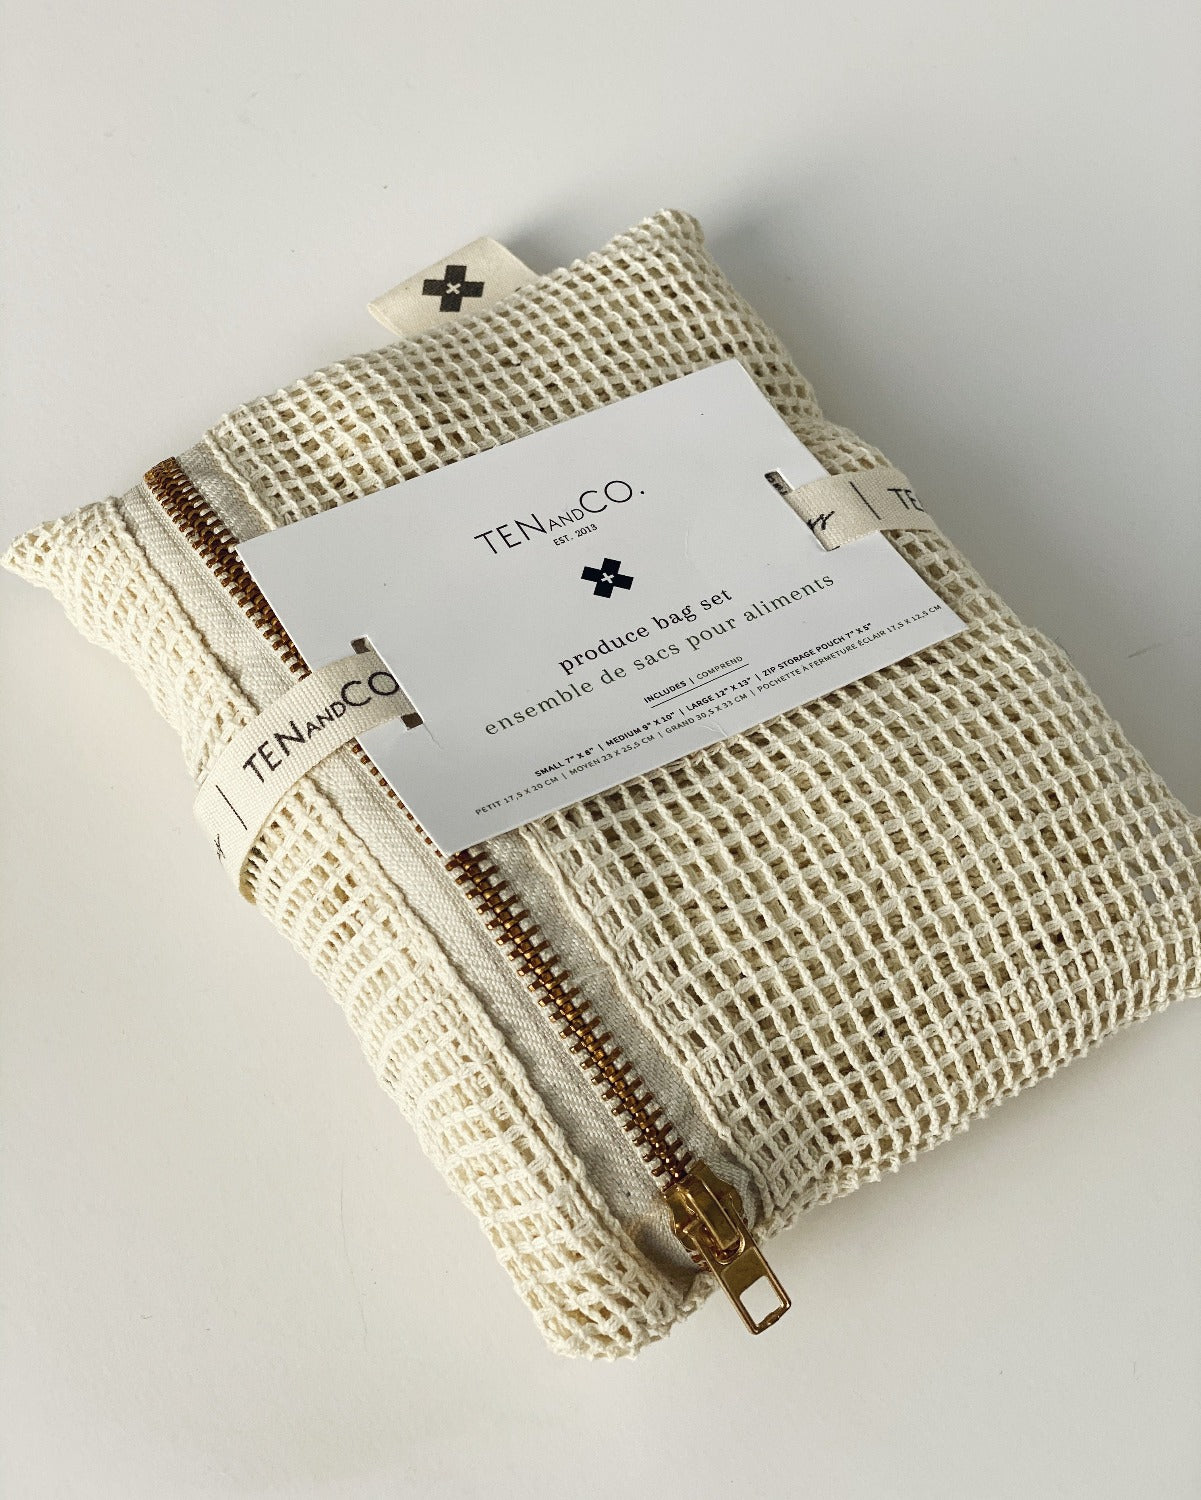 Flay lay image of Produce Bags on a white background. This is the close up image of the cotton mesh pouch with the produce bags inside. The pouch is zippered and has a paper tag attached by cotton ribbon. The tag has the Ten and Co. Logo on it with descriptive text in black font. 